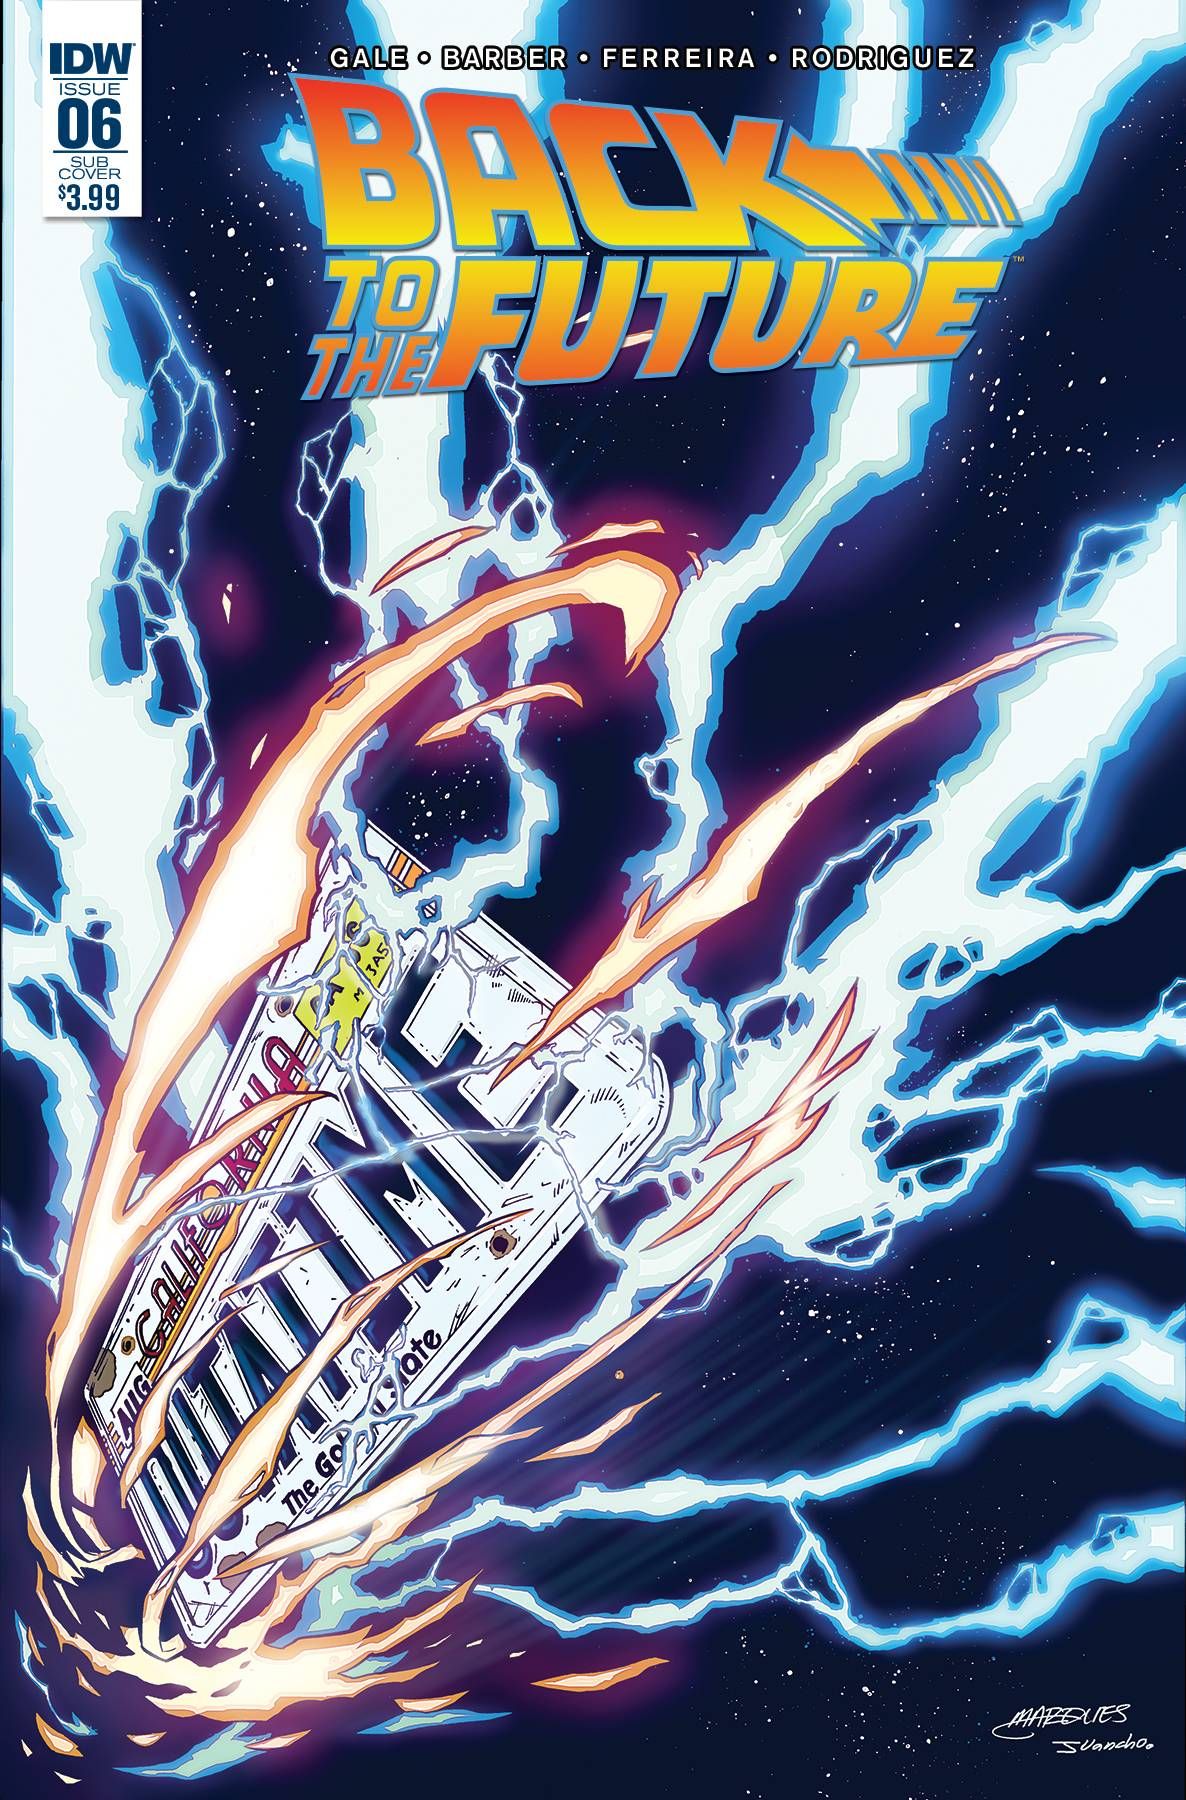 Back To The Future #6 Comic